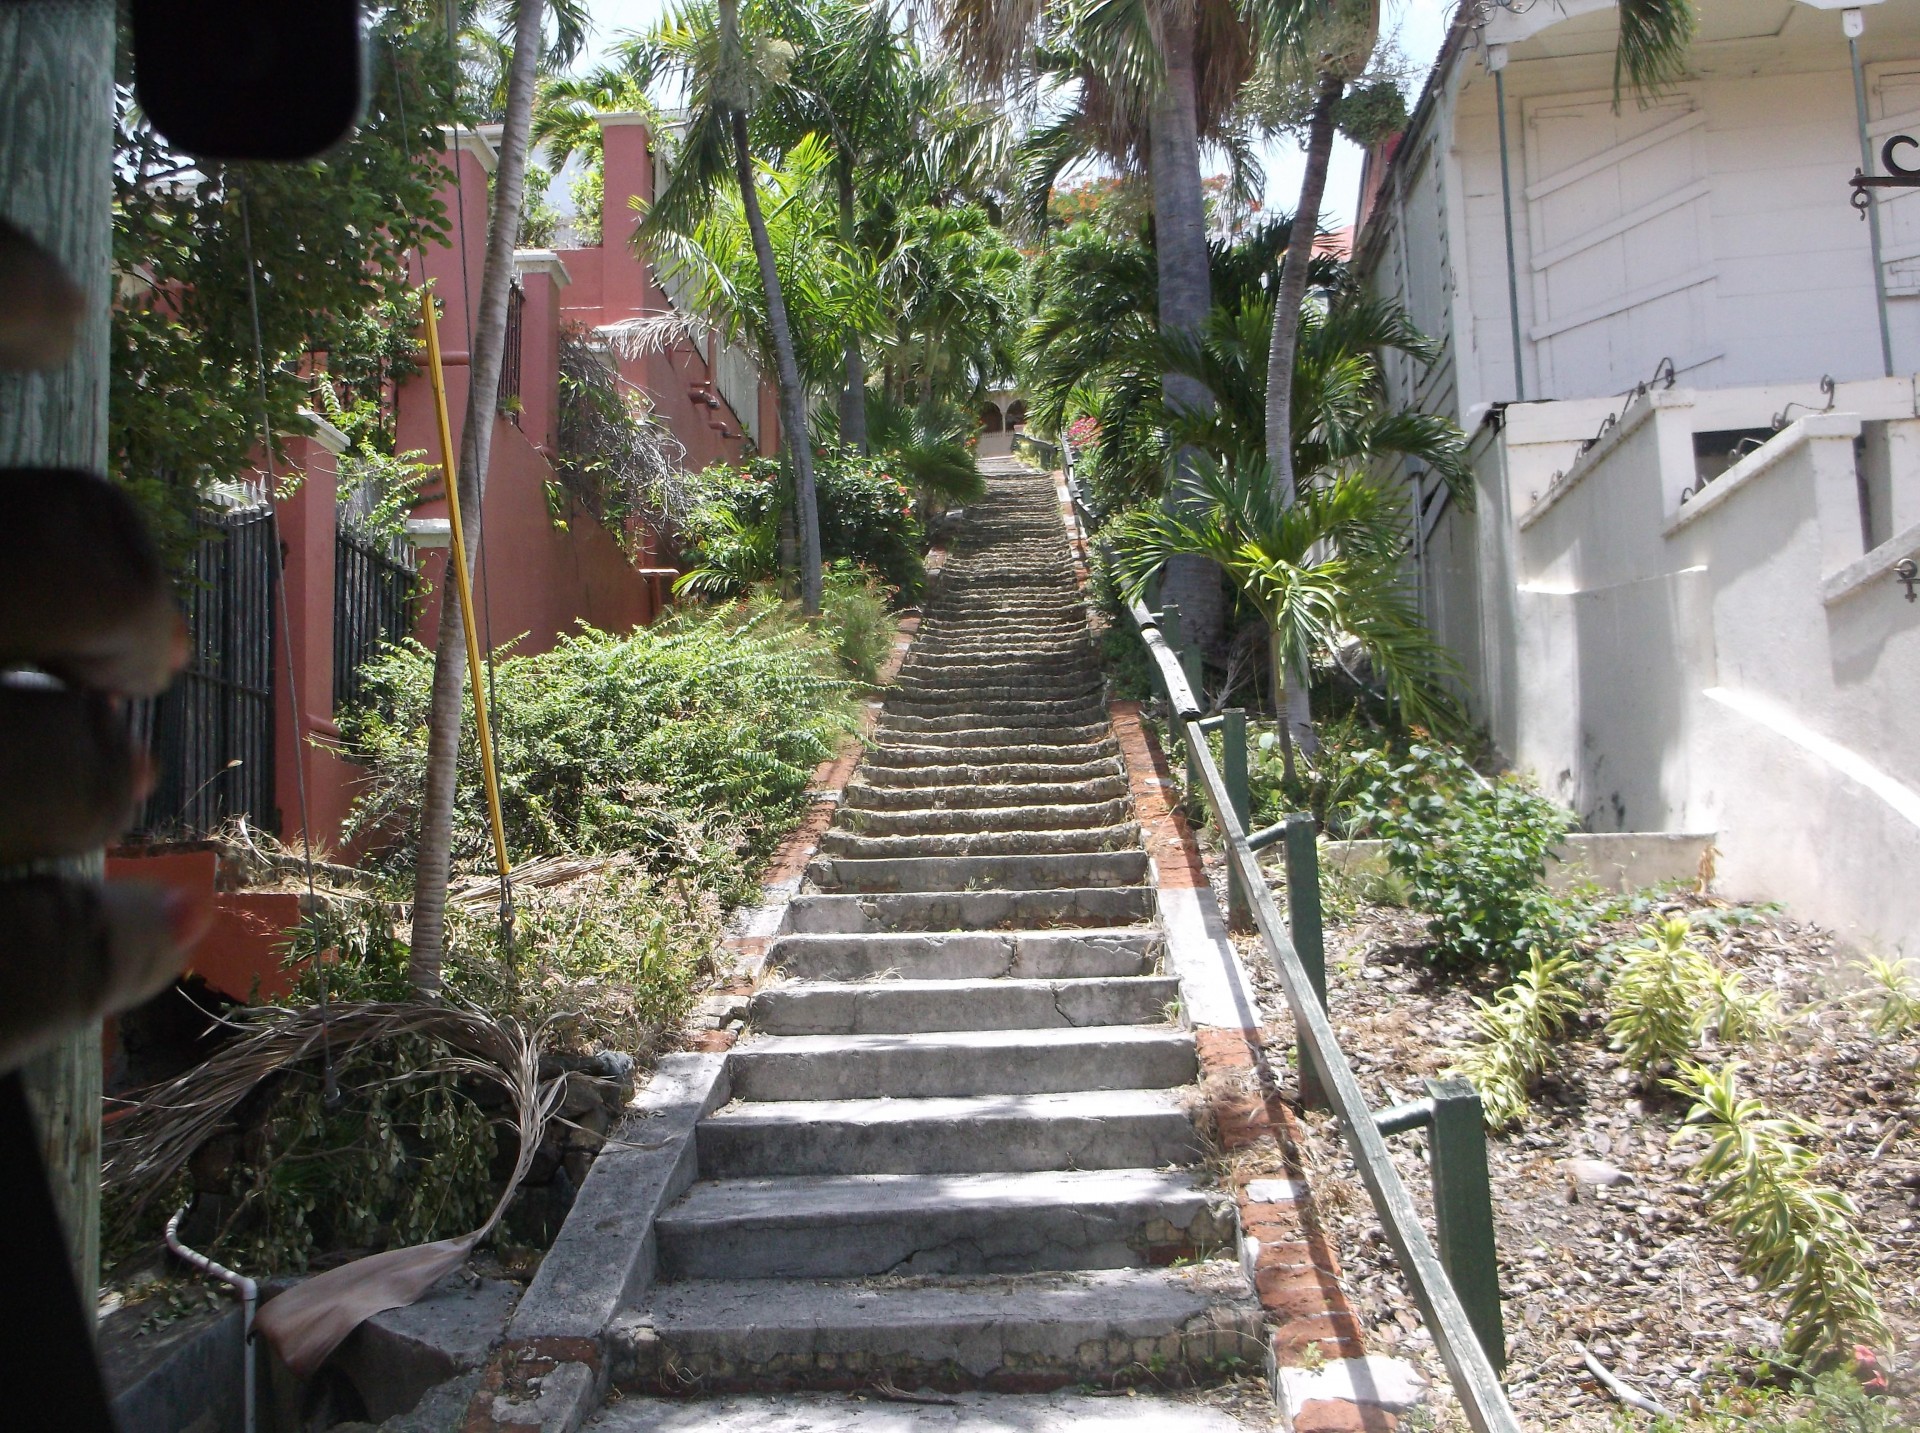 99 stairs steps free photo